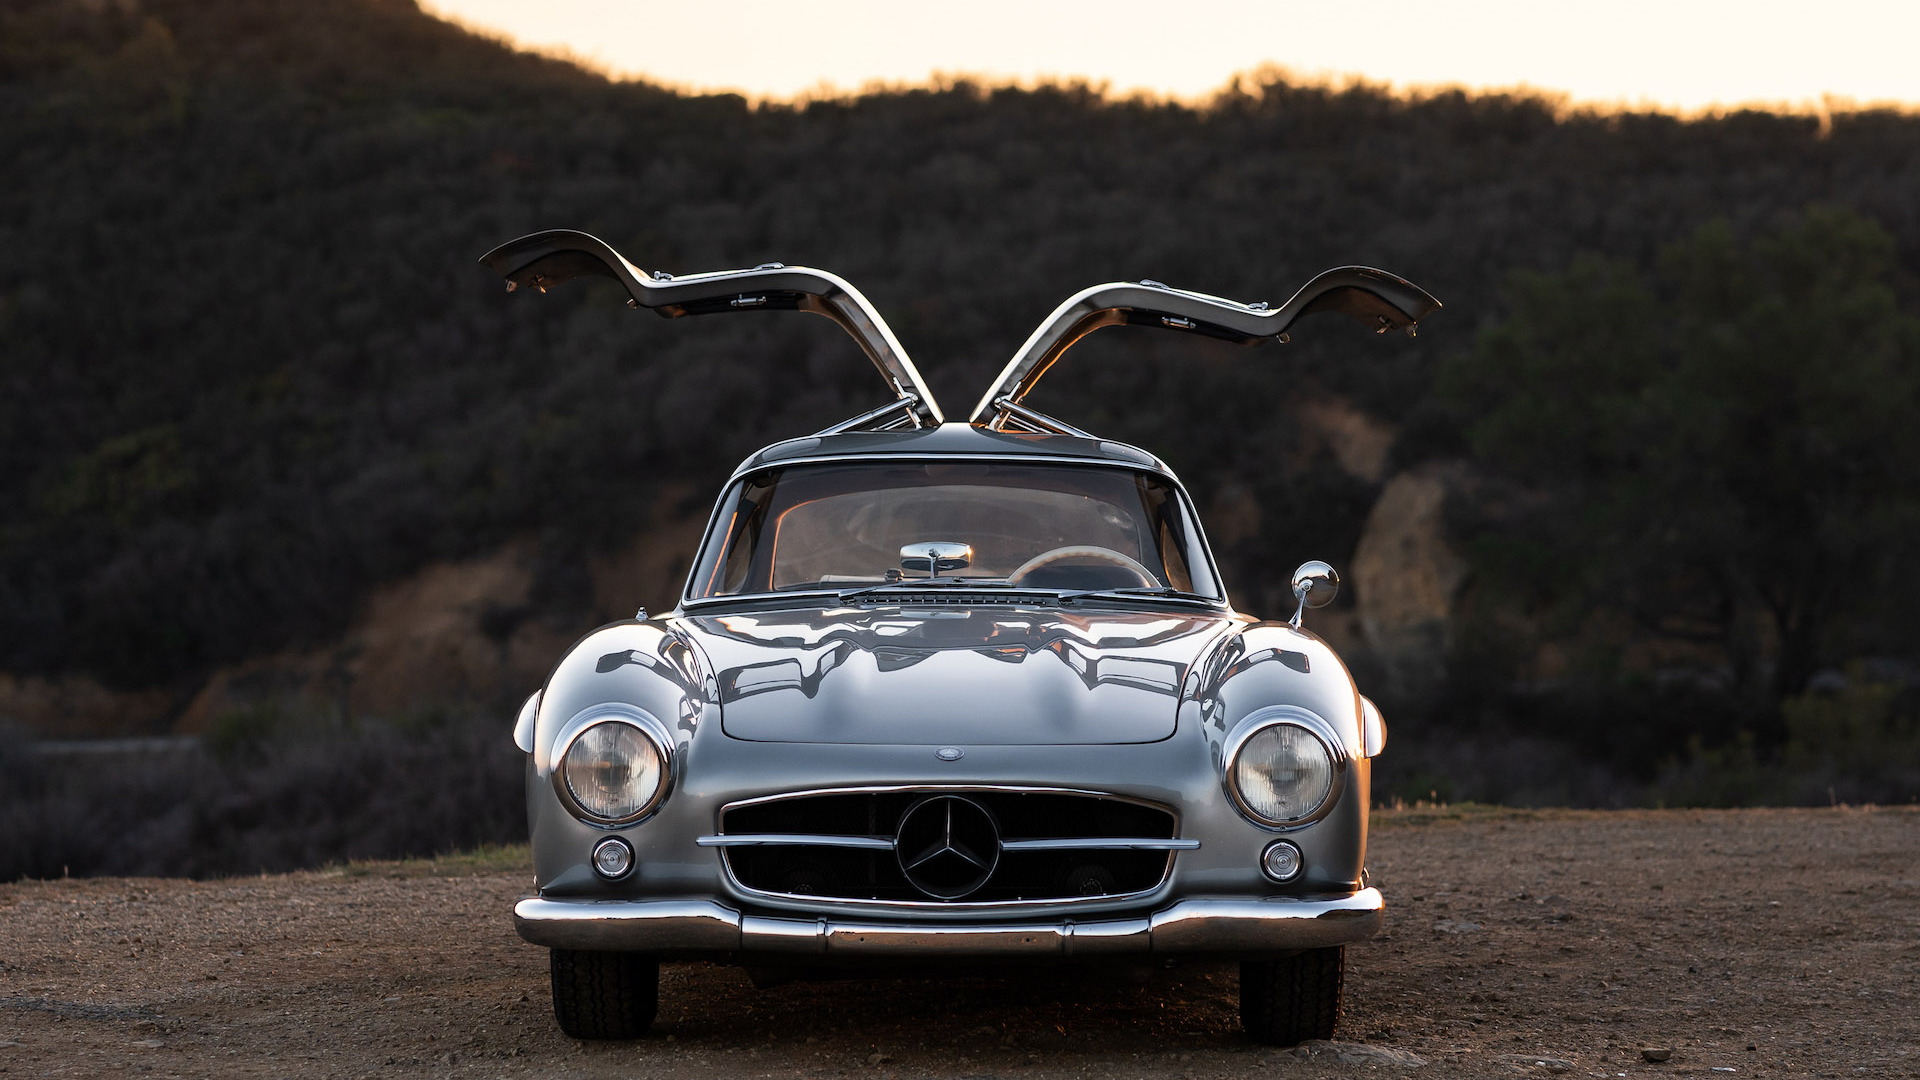 1955 Mercedes-Benz 300 SL Alloy Gullwing - Photo credit: RM Sotheby's